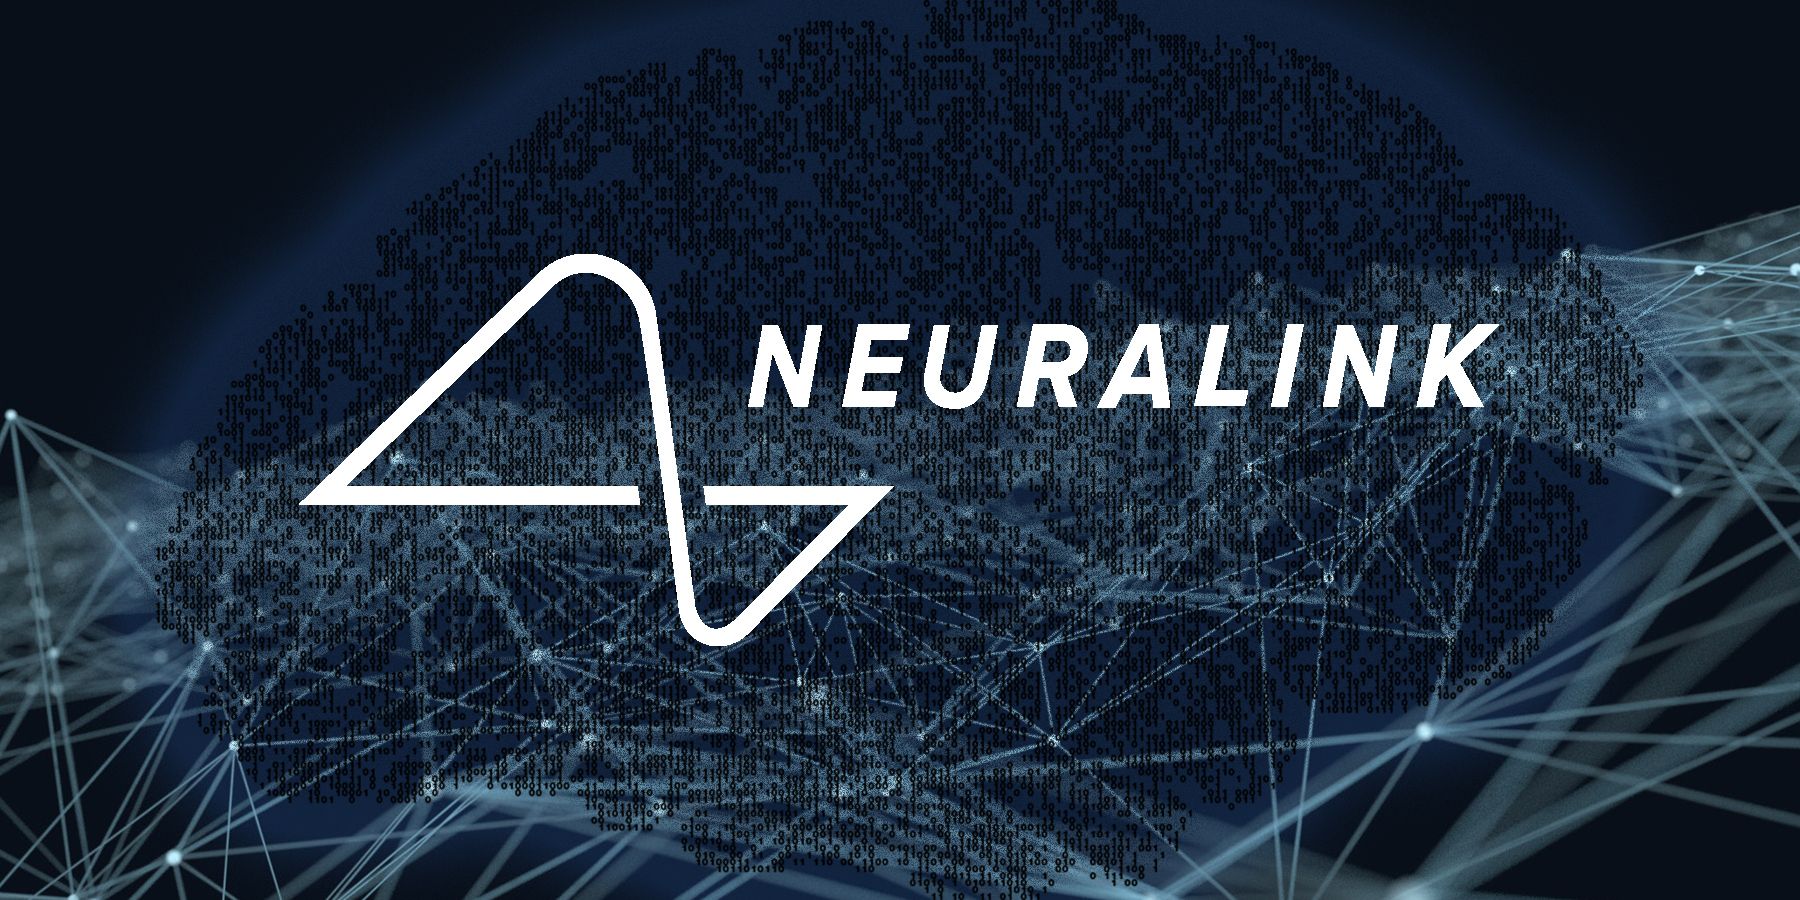 The Neuralink logo in white lettering in front of a dark blue render of digitized neural pathways